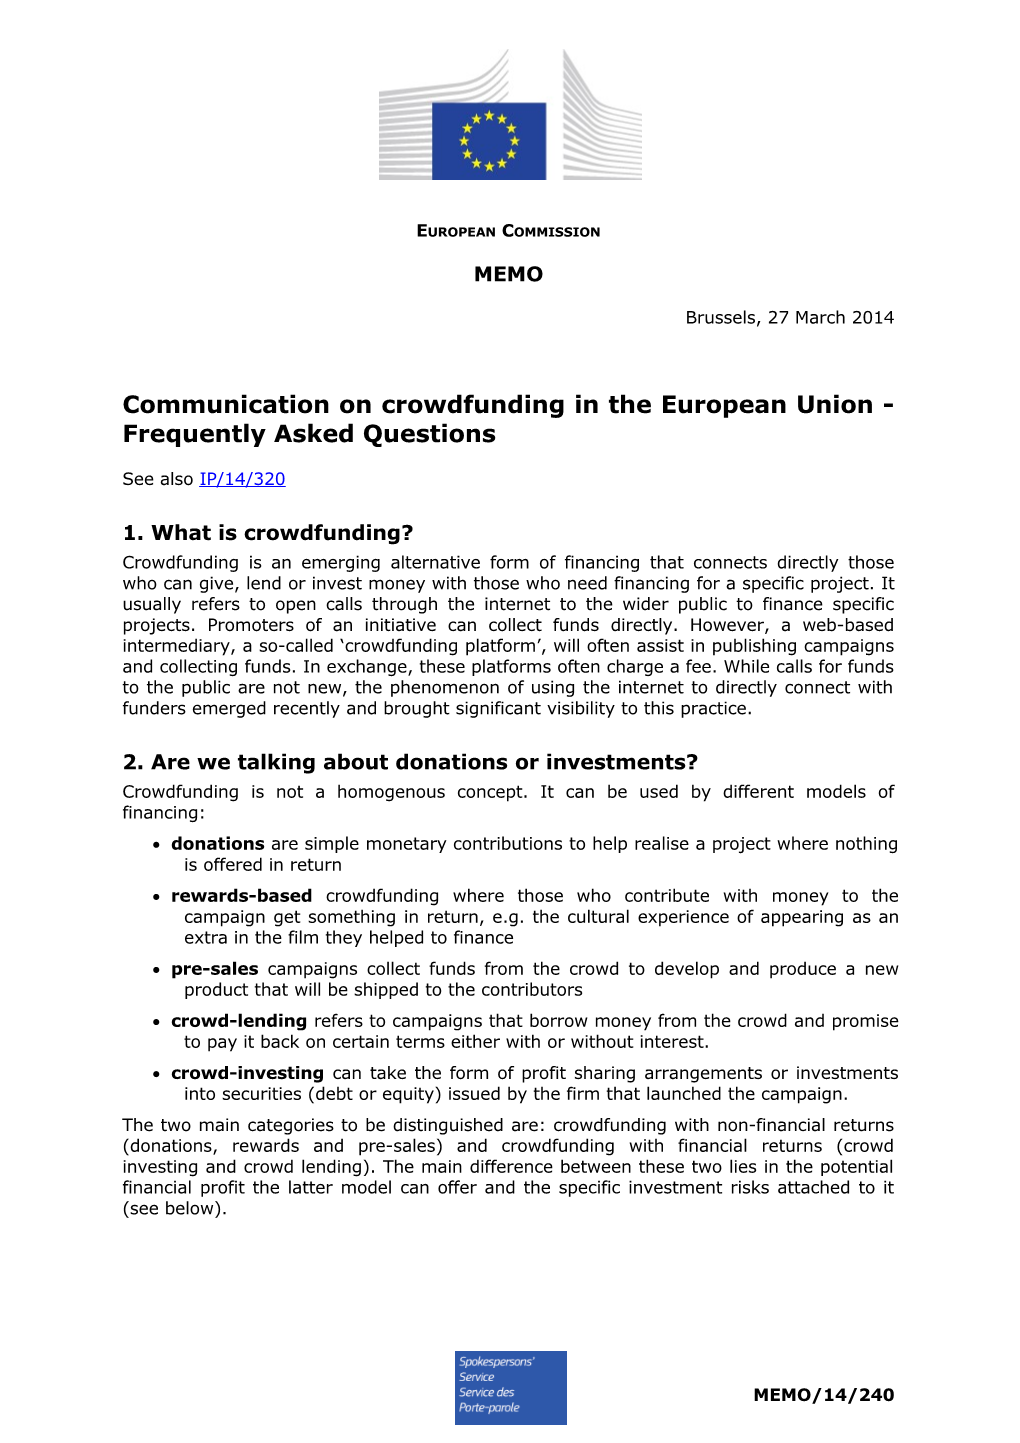 Communication on Crowdfunding in the European Union - Frequently Asked Questions